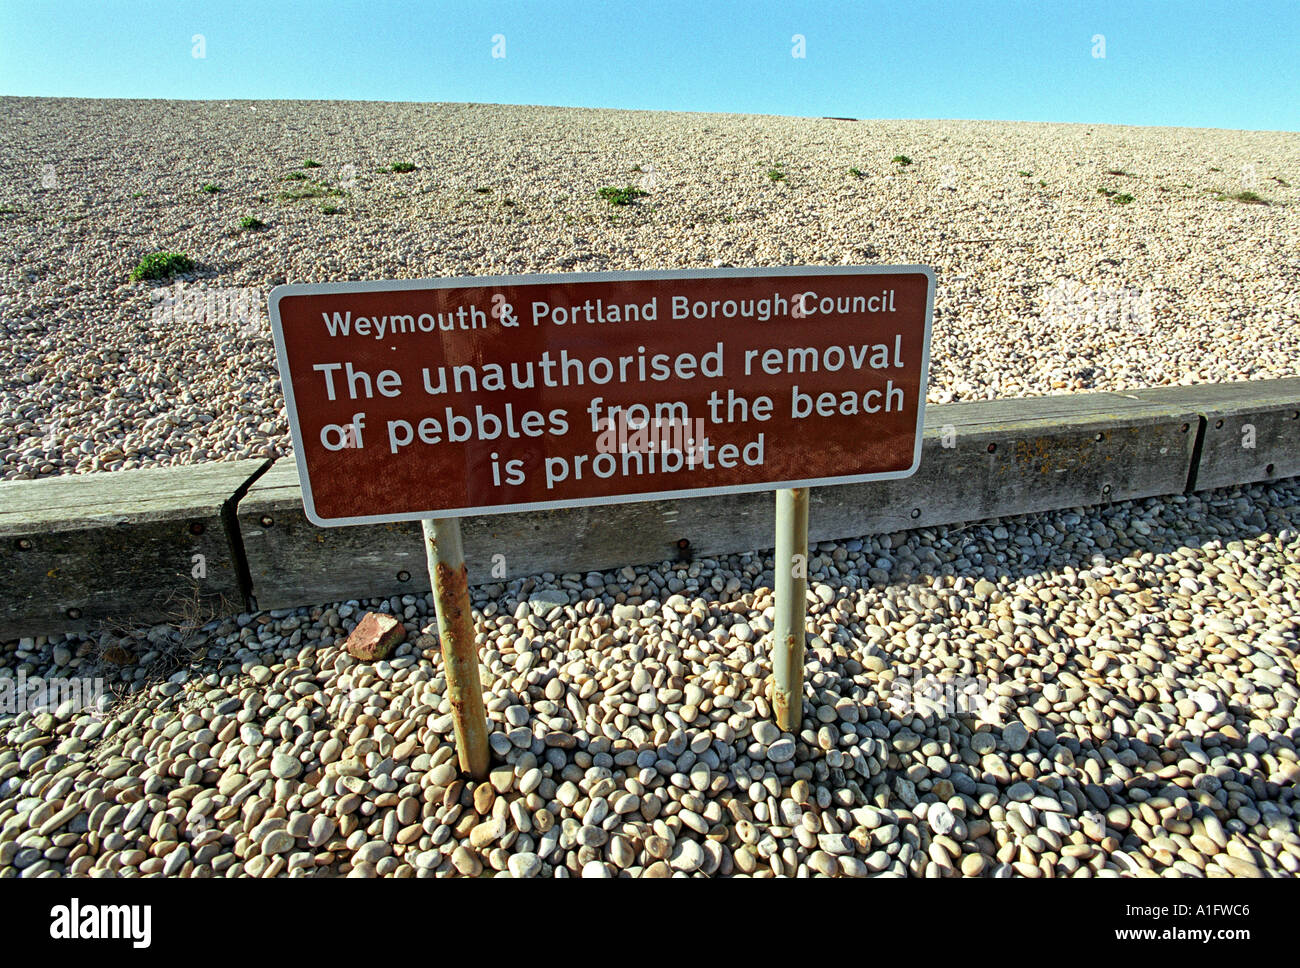 The unauthorised removal of pebbles from the beach is prohibited sign at Chesil Beach in Dorset Britain UK Stock Photo